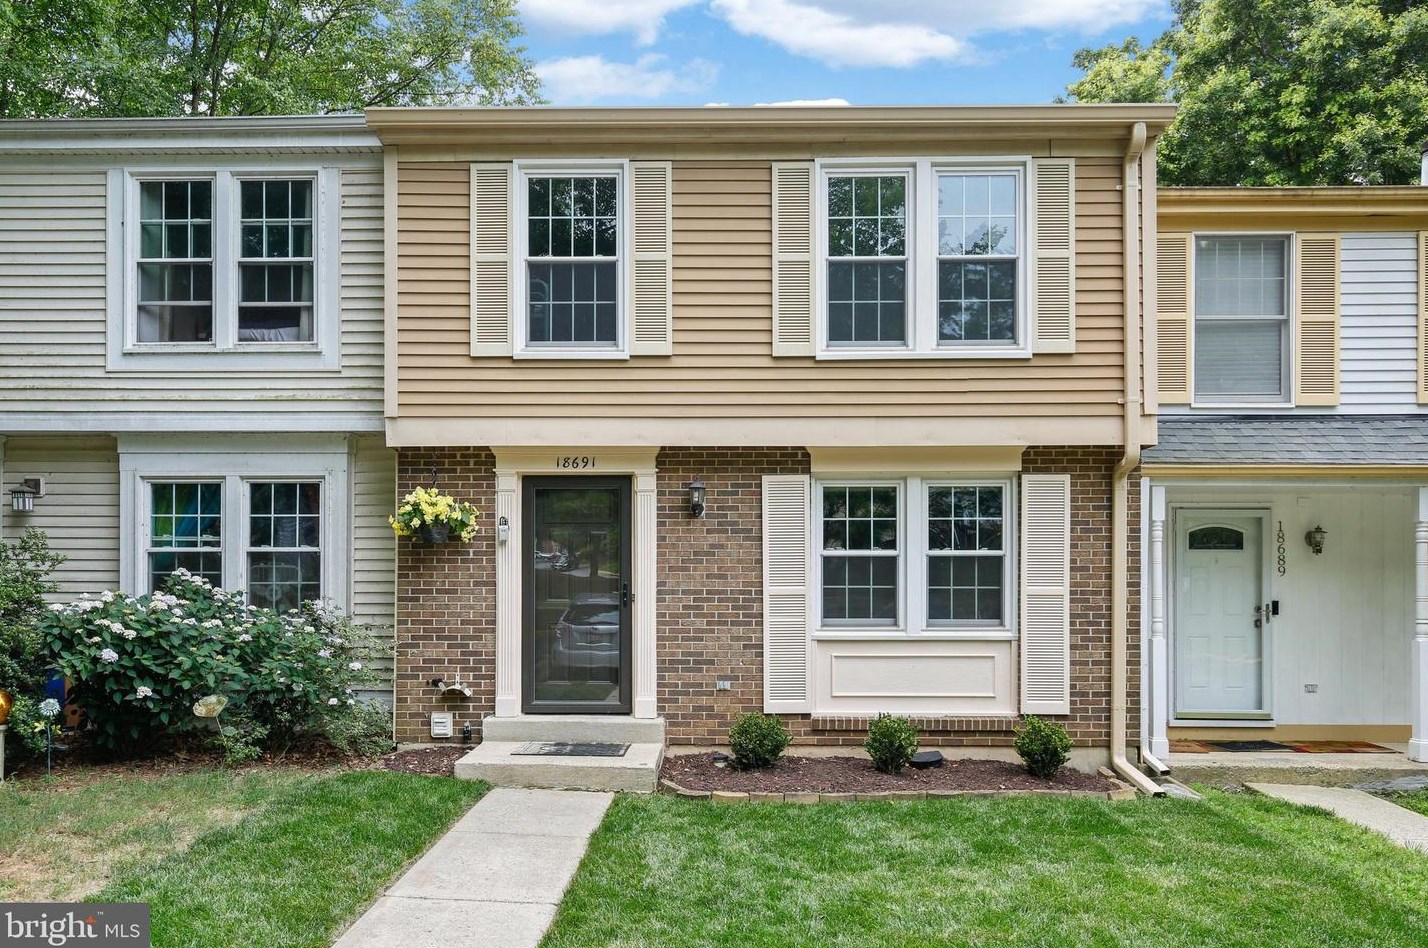 18691 Cross Country Ln, Gaithersburg, MD 20879-4606